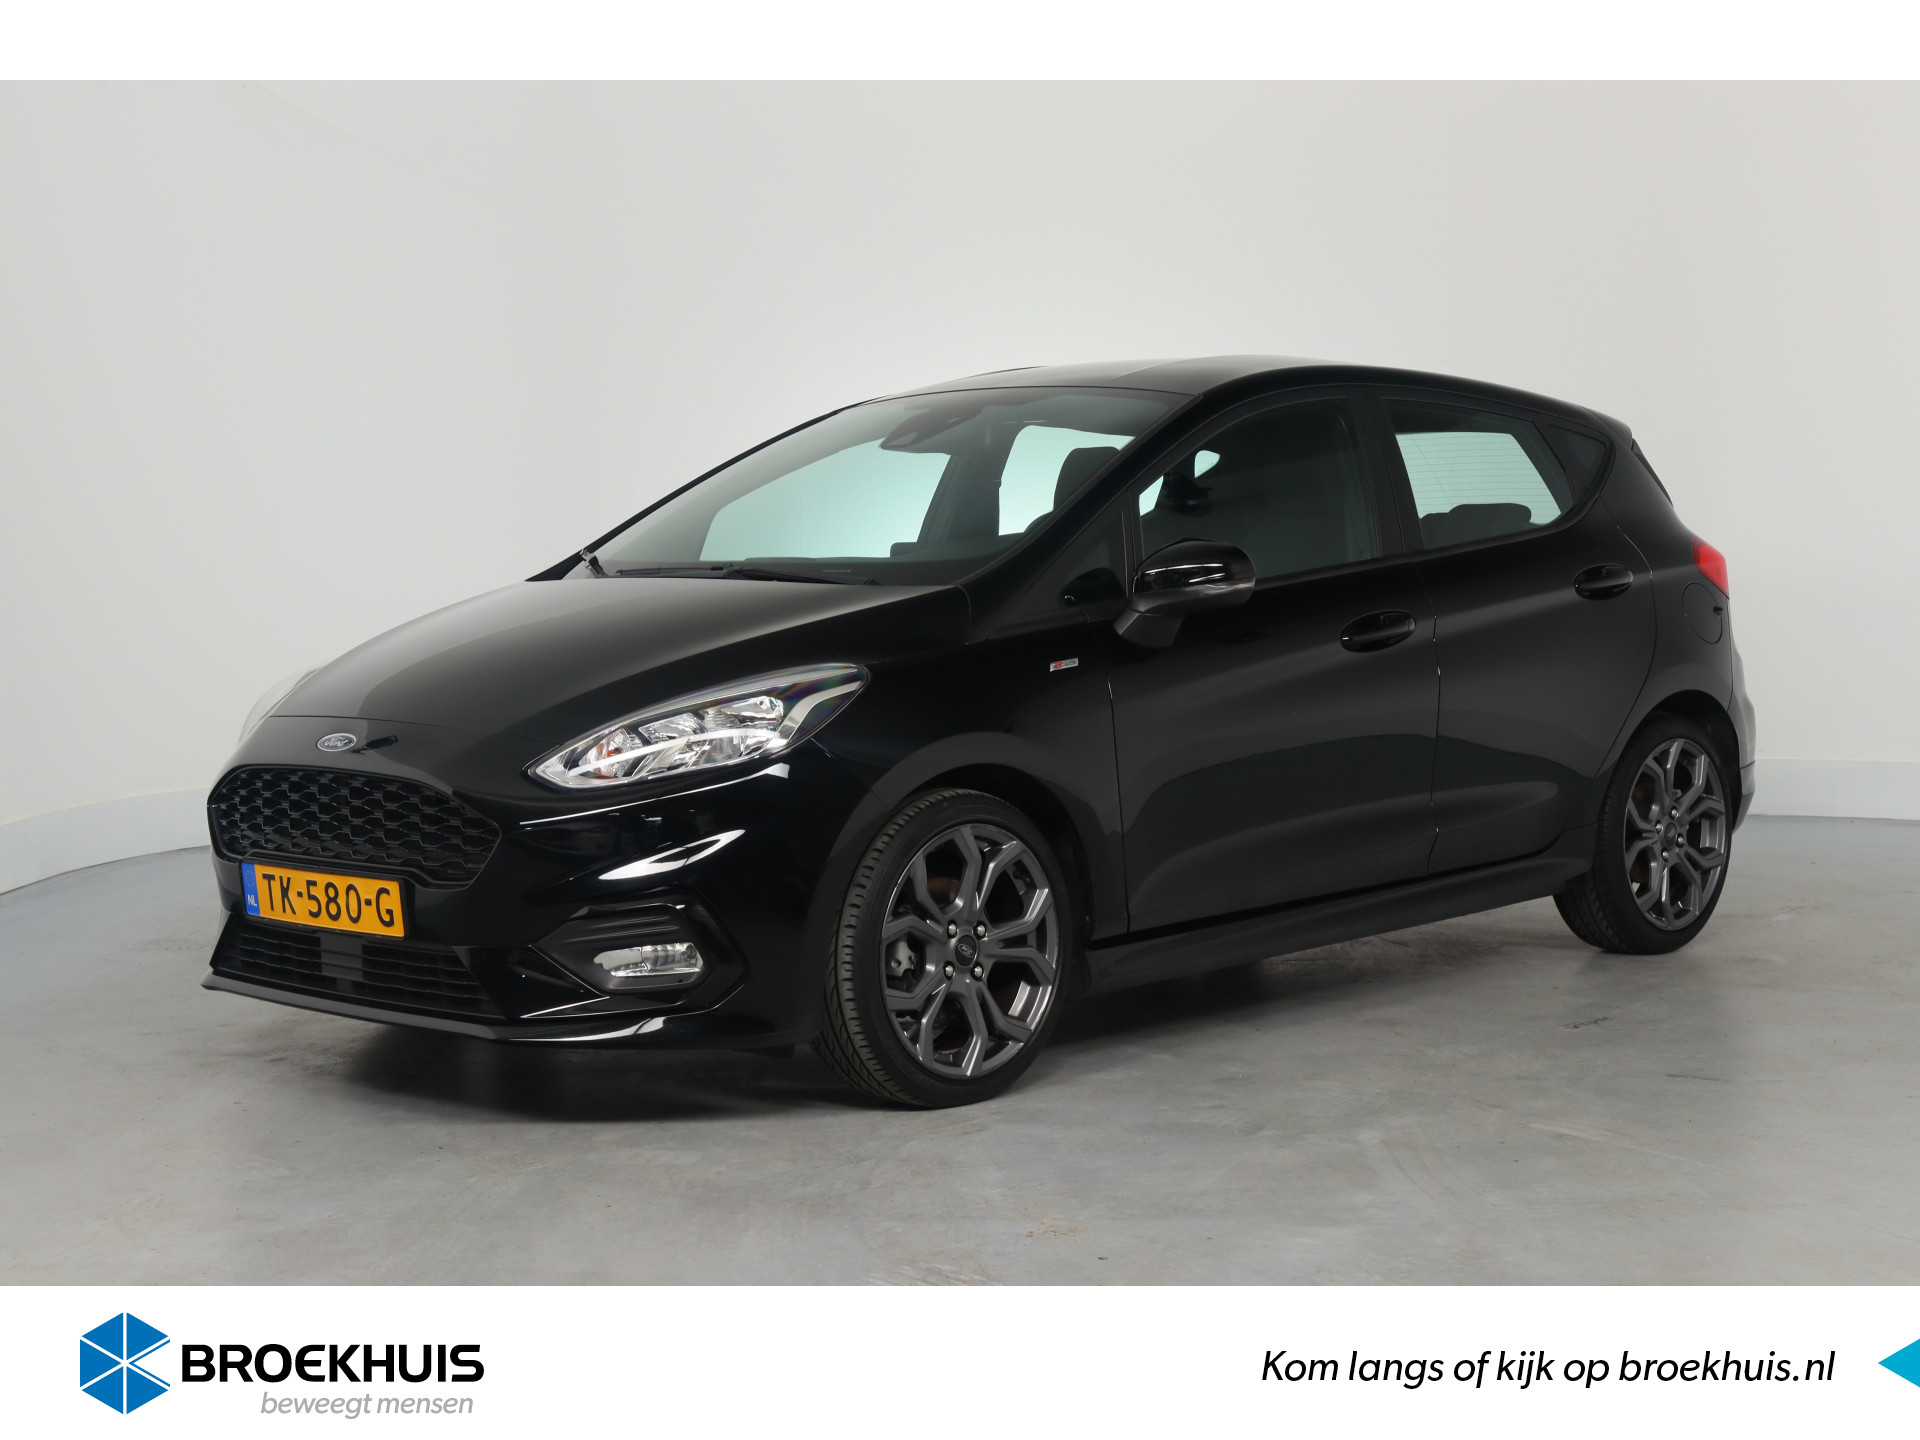 Ford Fiesta 1.0 EcoBoost ST-Line | Navigatie | Climate Control | Keyless | 17 inch | Cruise Control | Lane Assist | Apple Carplay | Android bij viaBOVAG.nl